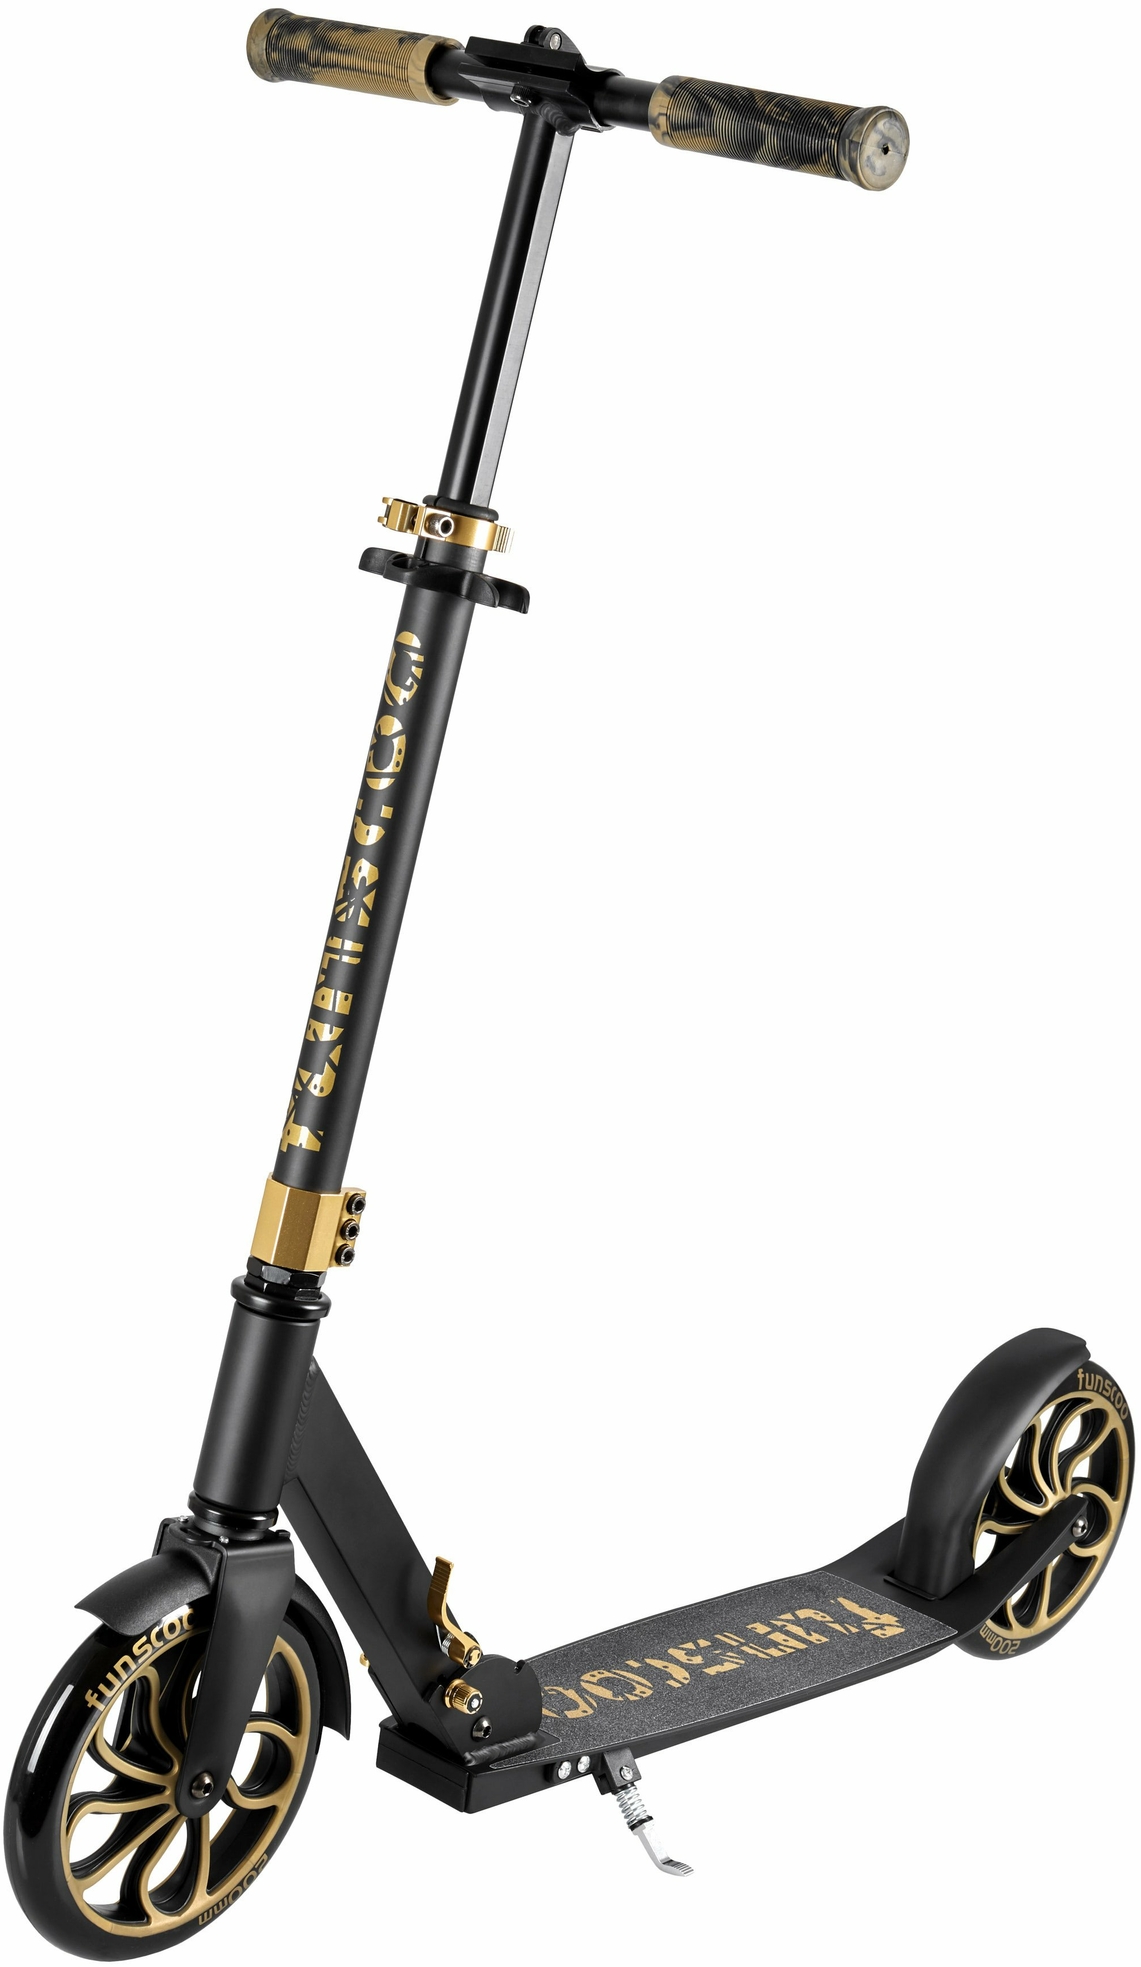 skate-scooter: Funscoo funscoo Scooter  200 (swgo) 